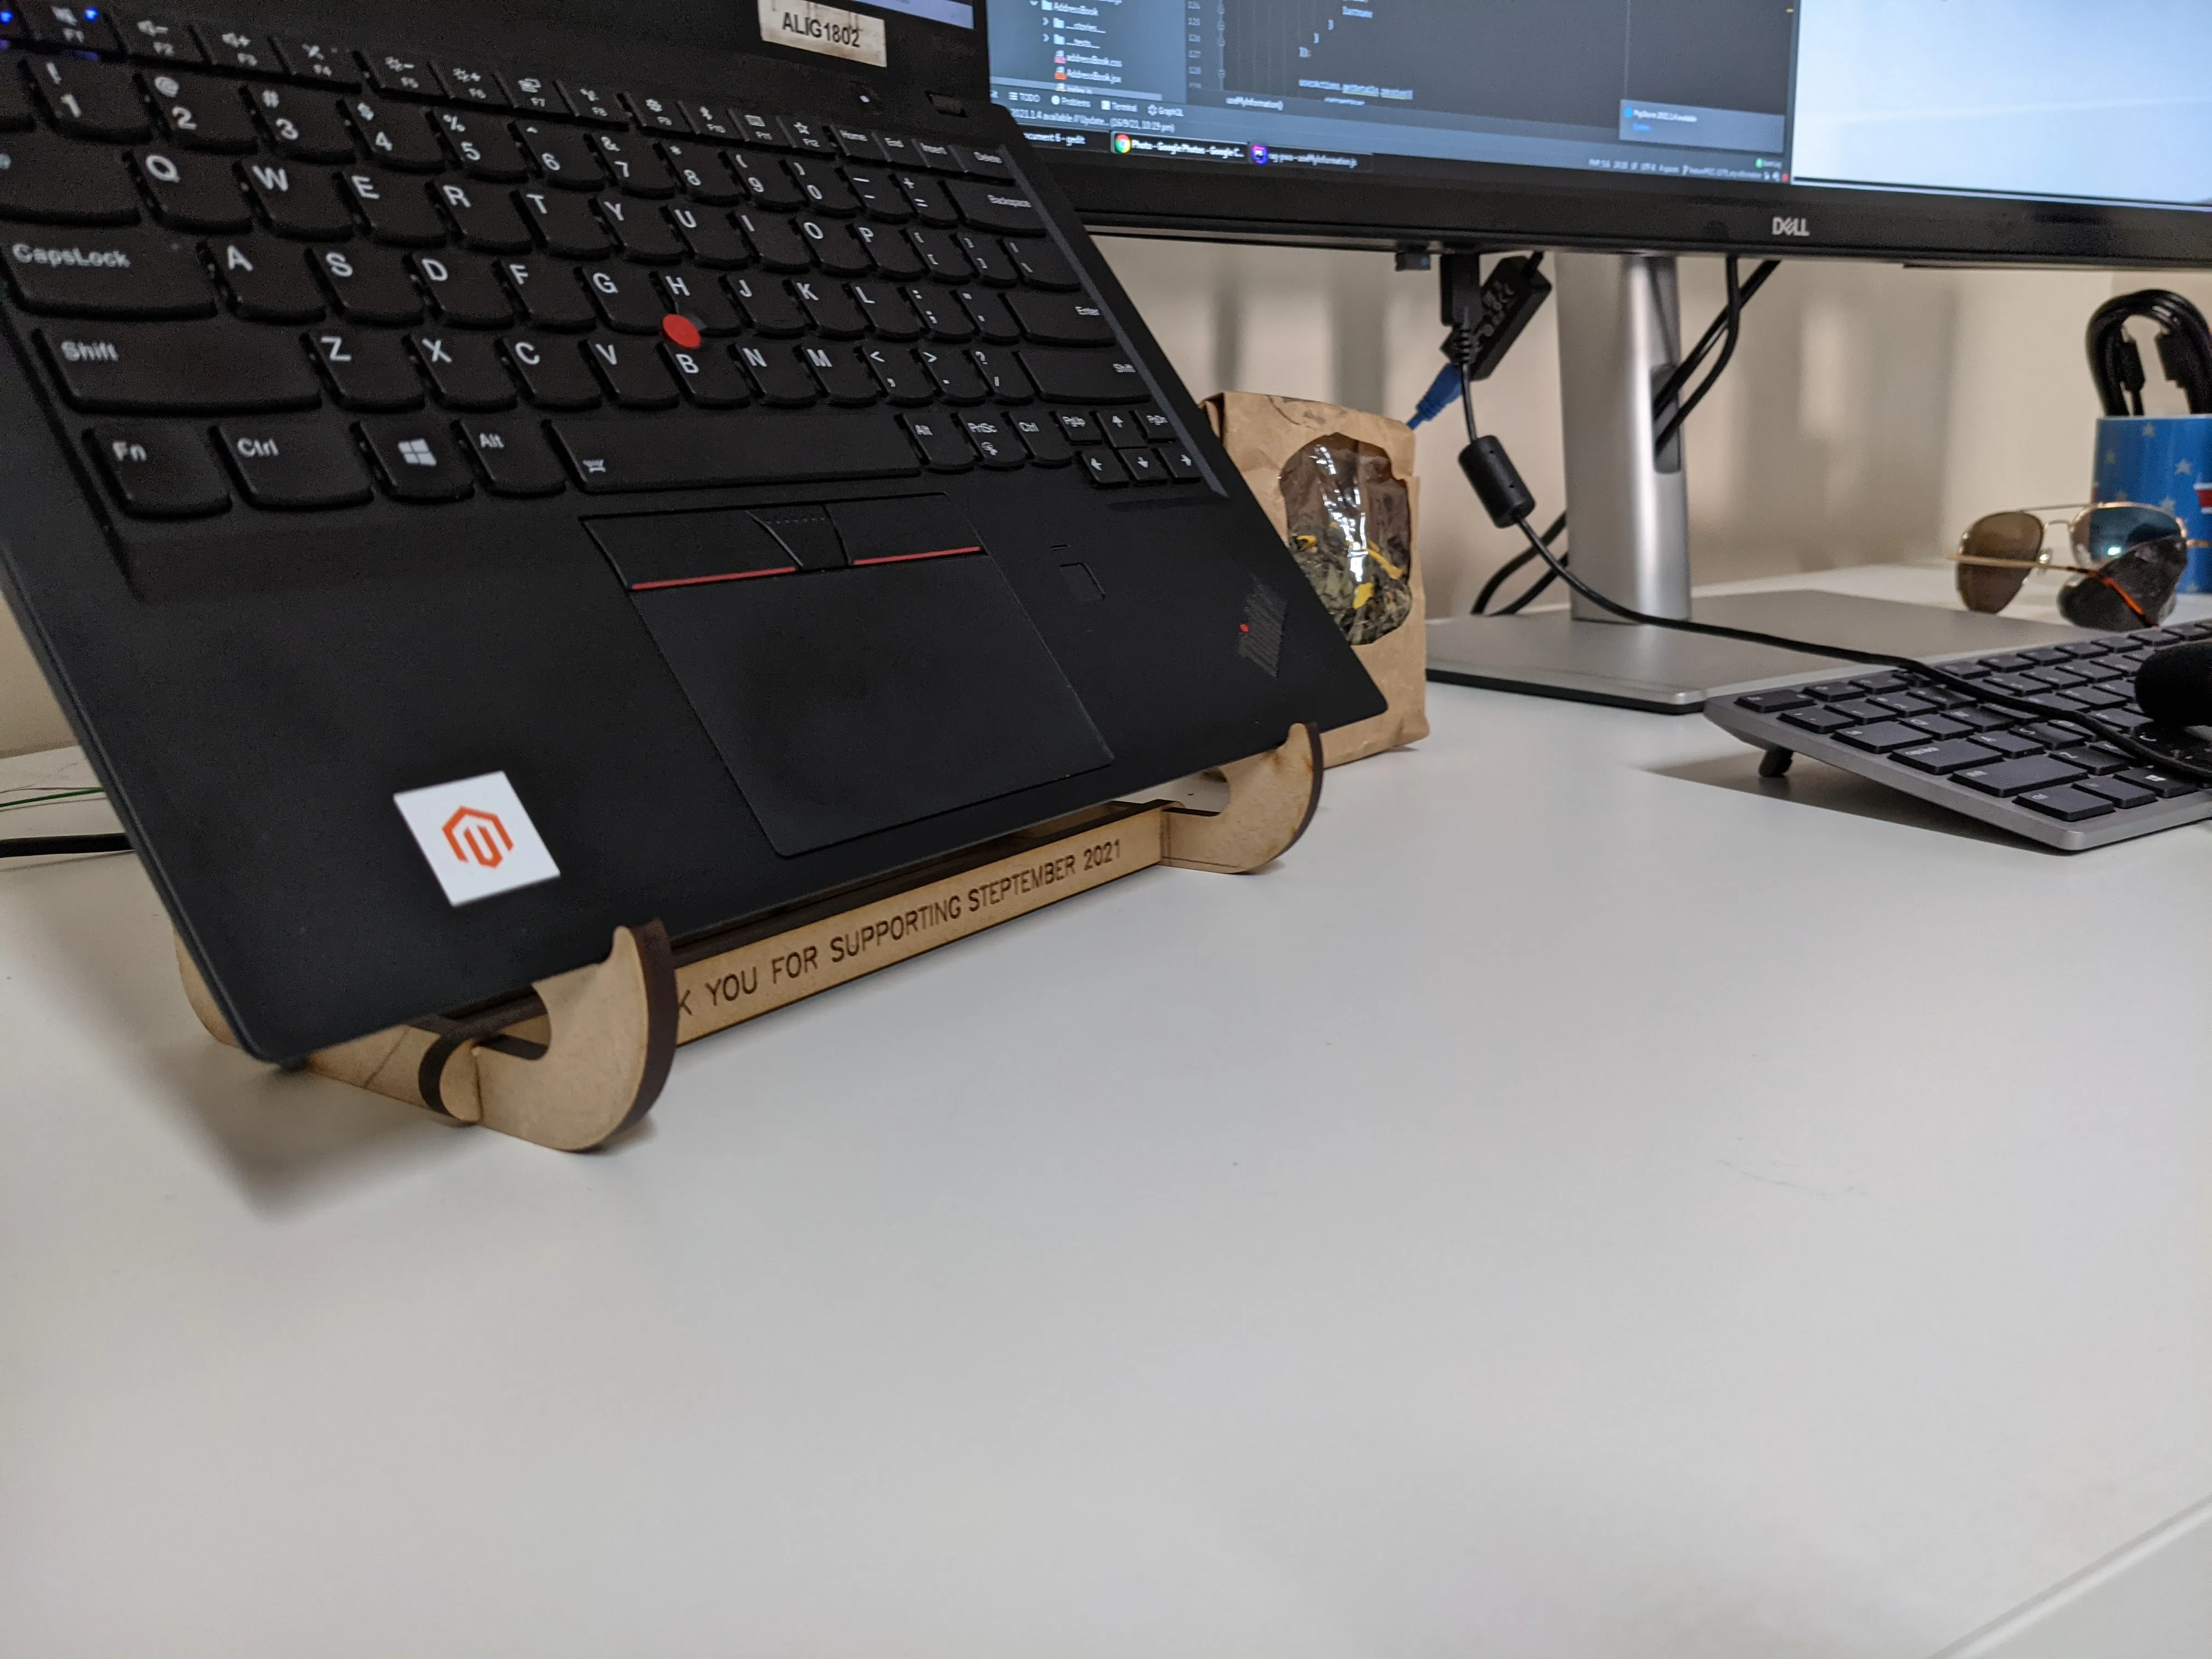 Keeps the screen aligned with the main display while taking less desk space